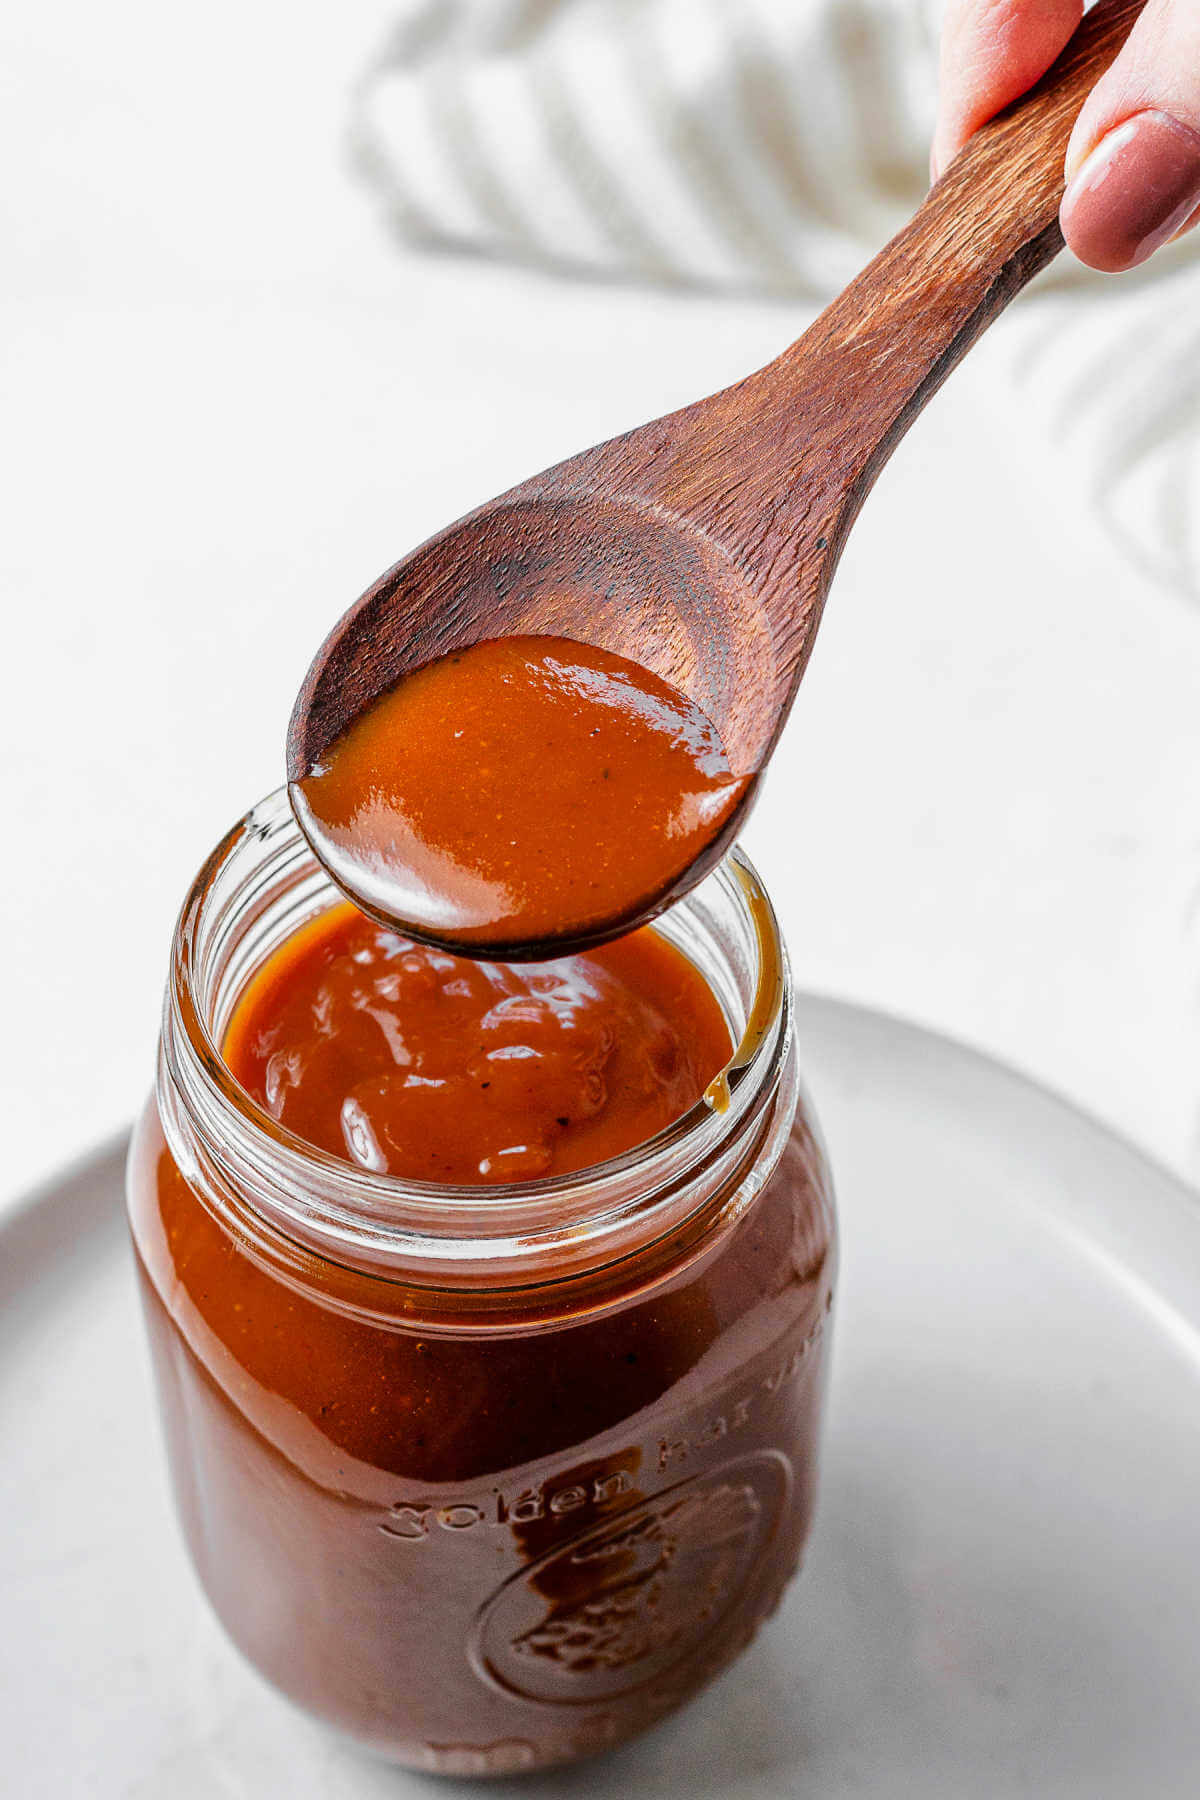 Spooning sauce into a mason jar sitting on a plate.